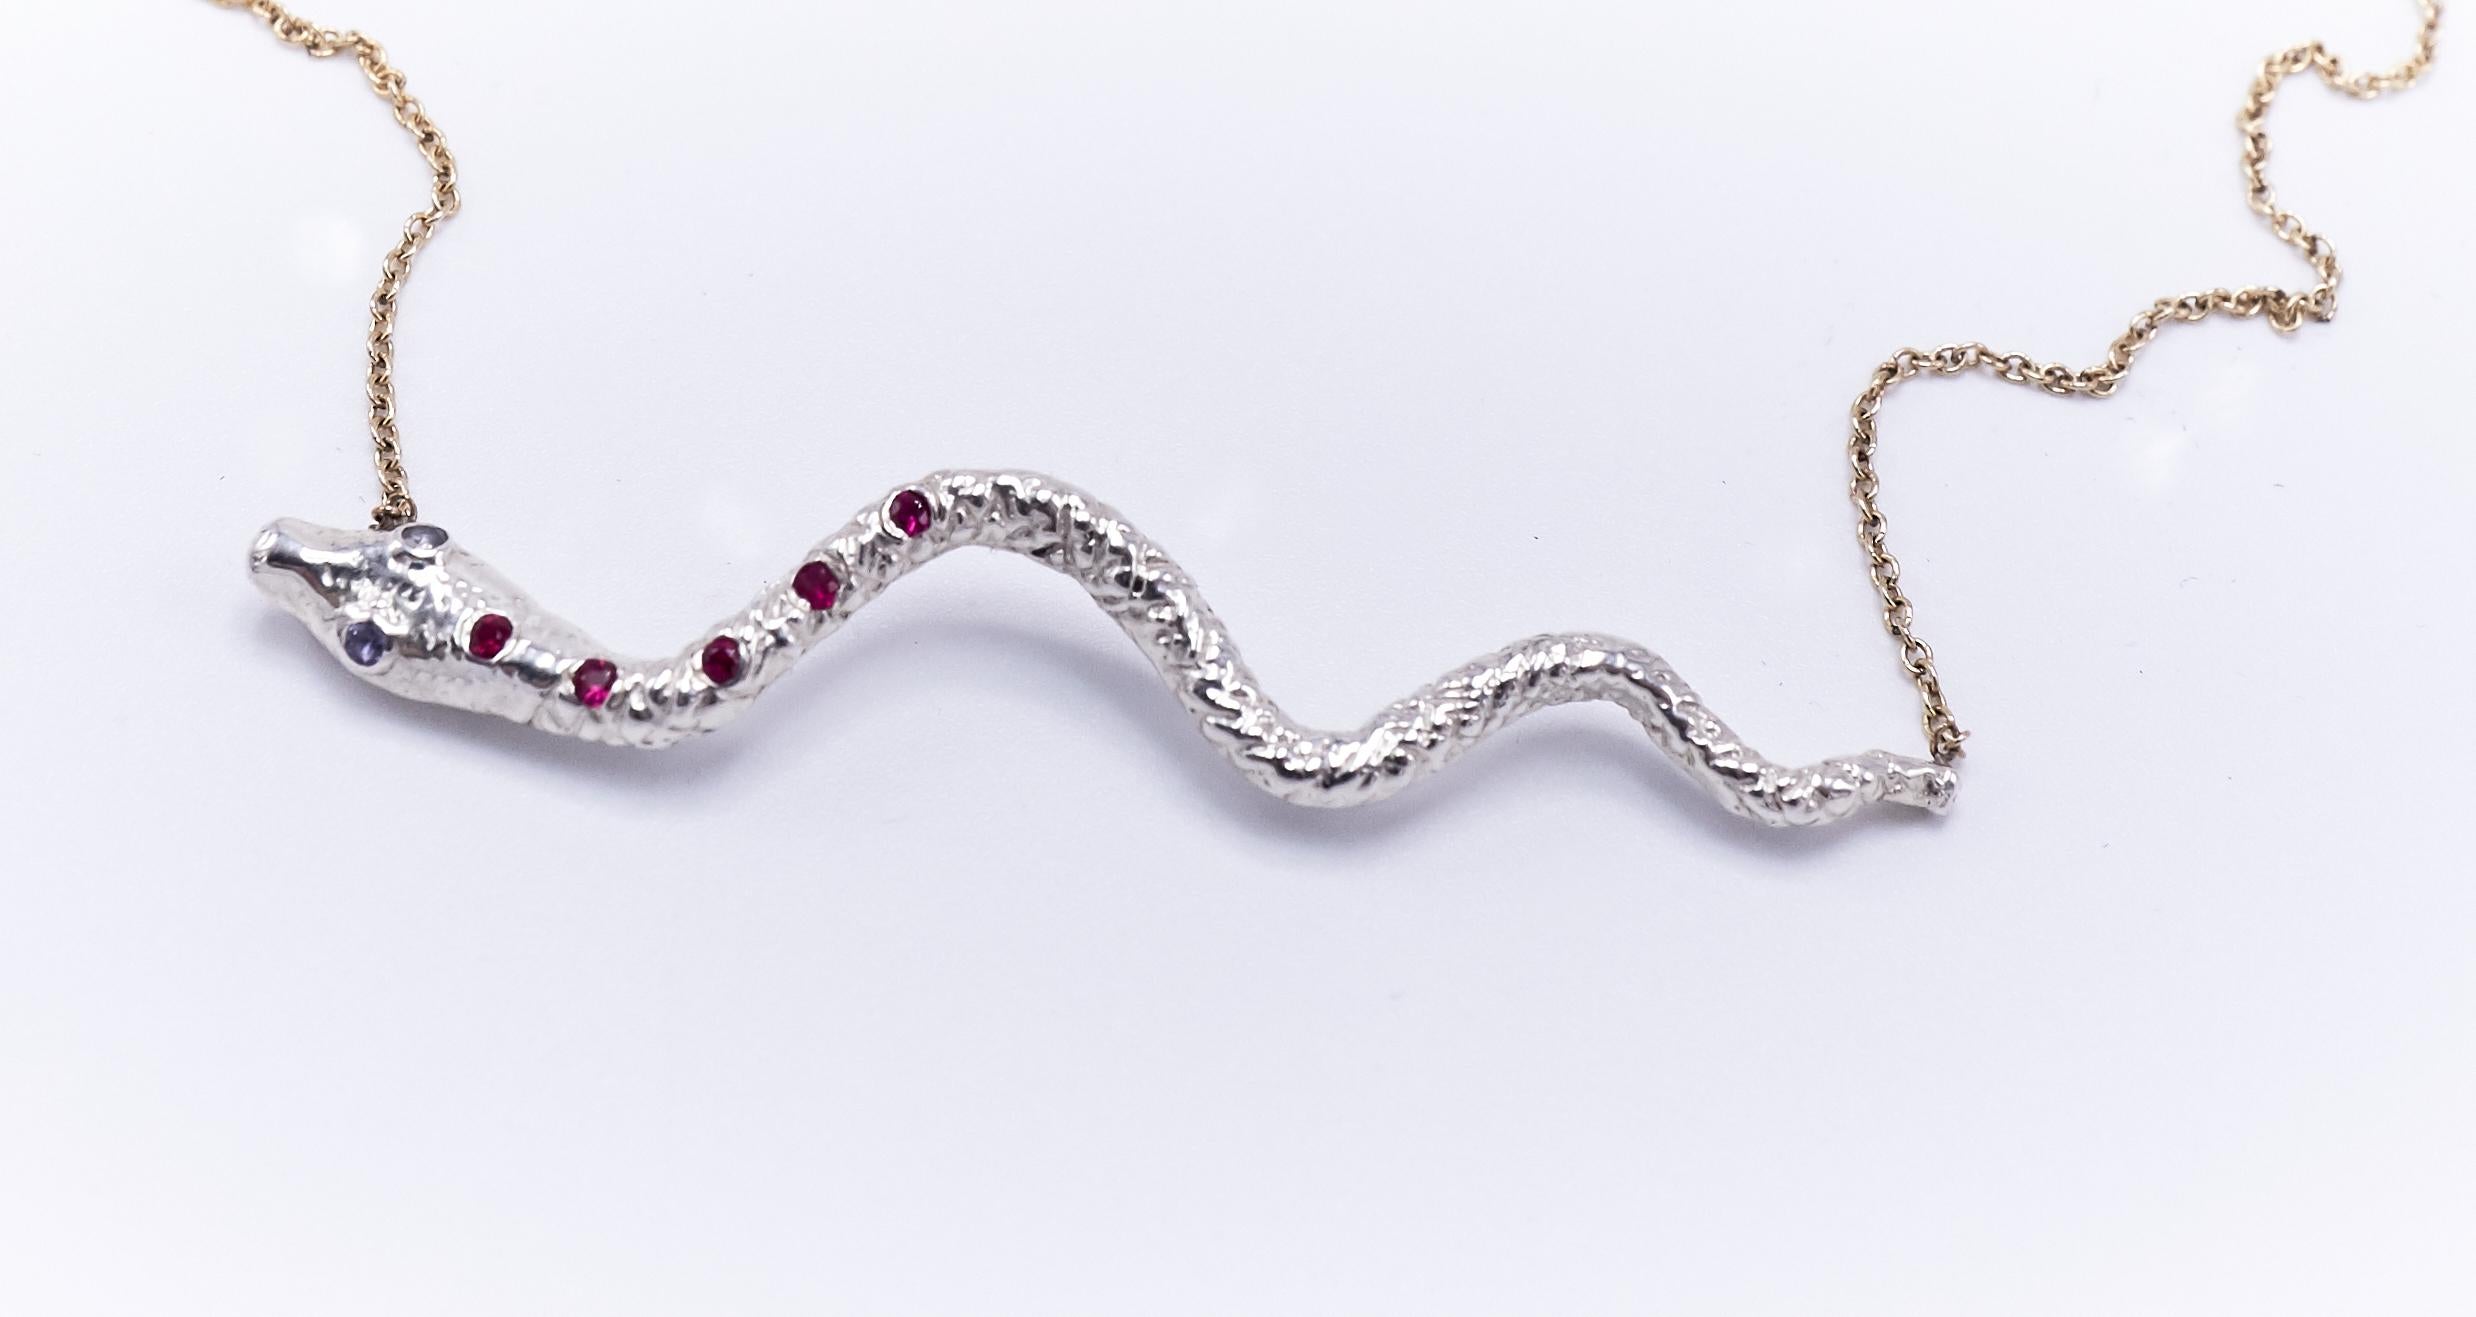 Victorian Choker Chain Necklace Ruby Snake Pendant J Dauphin For Sale